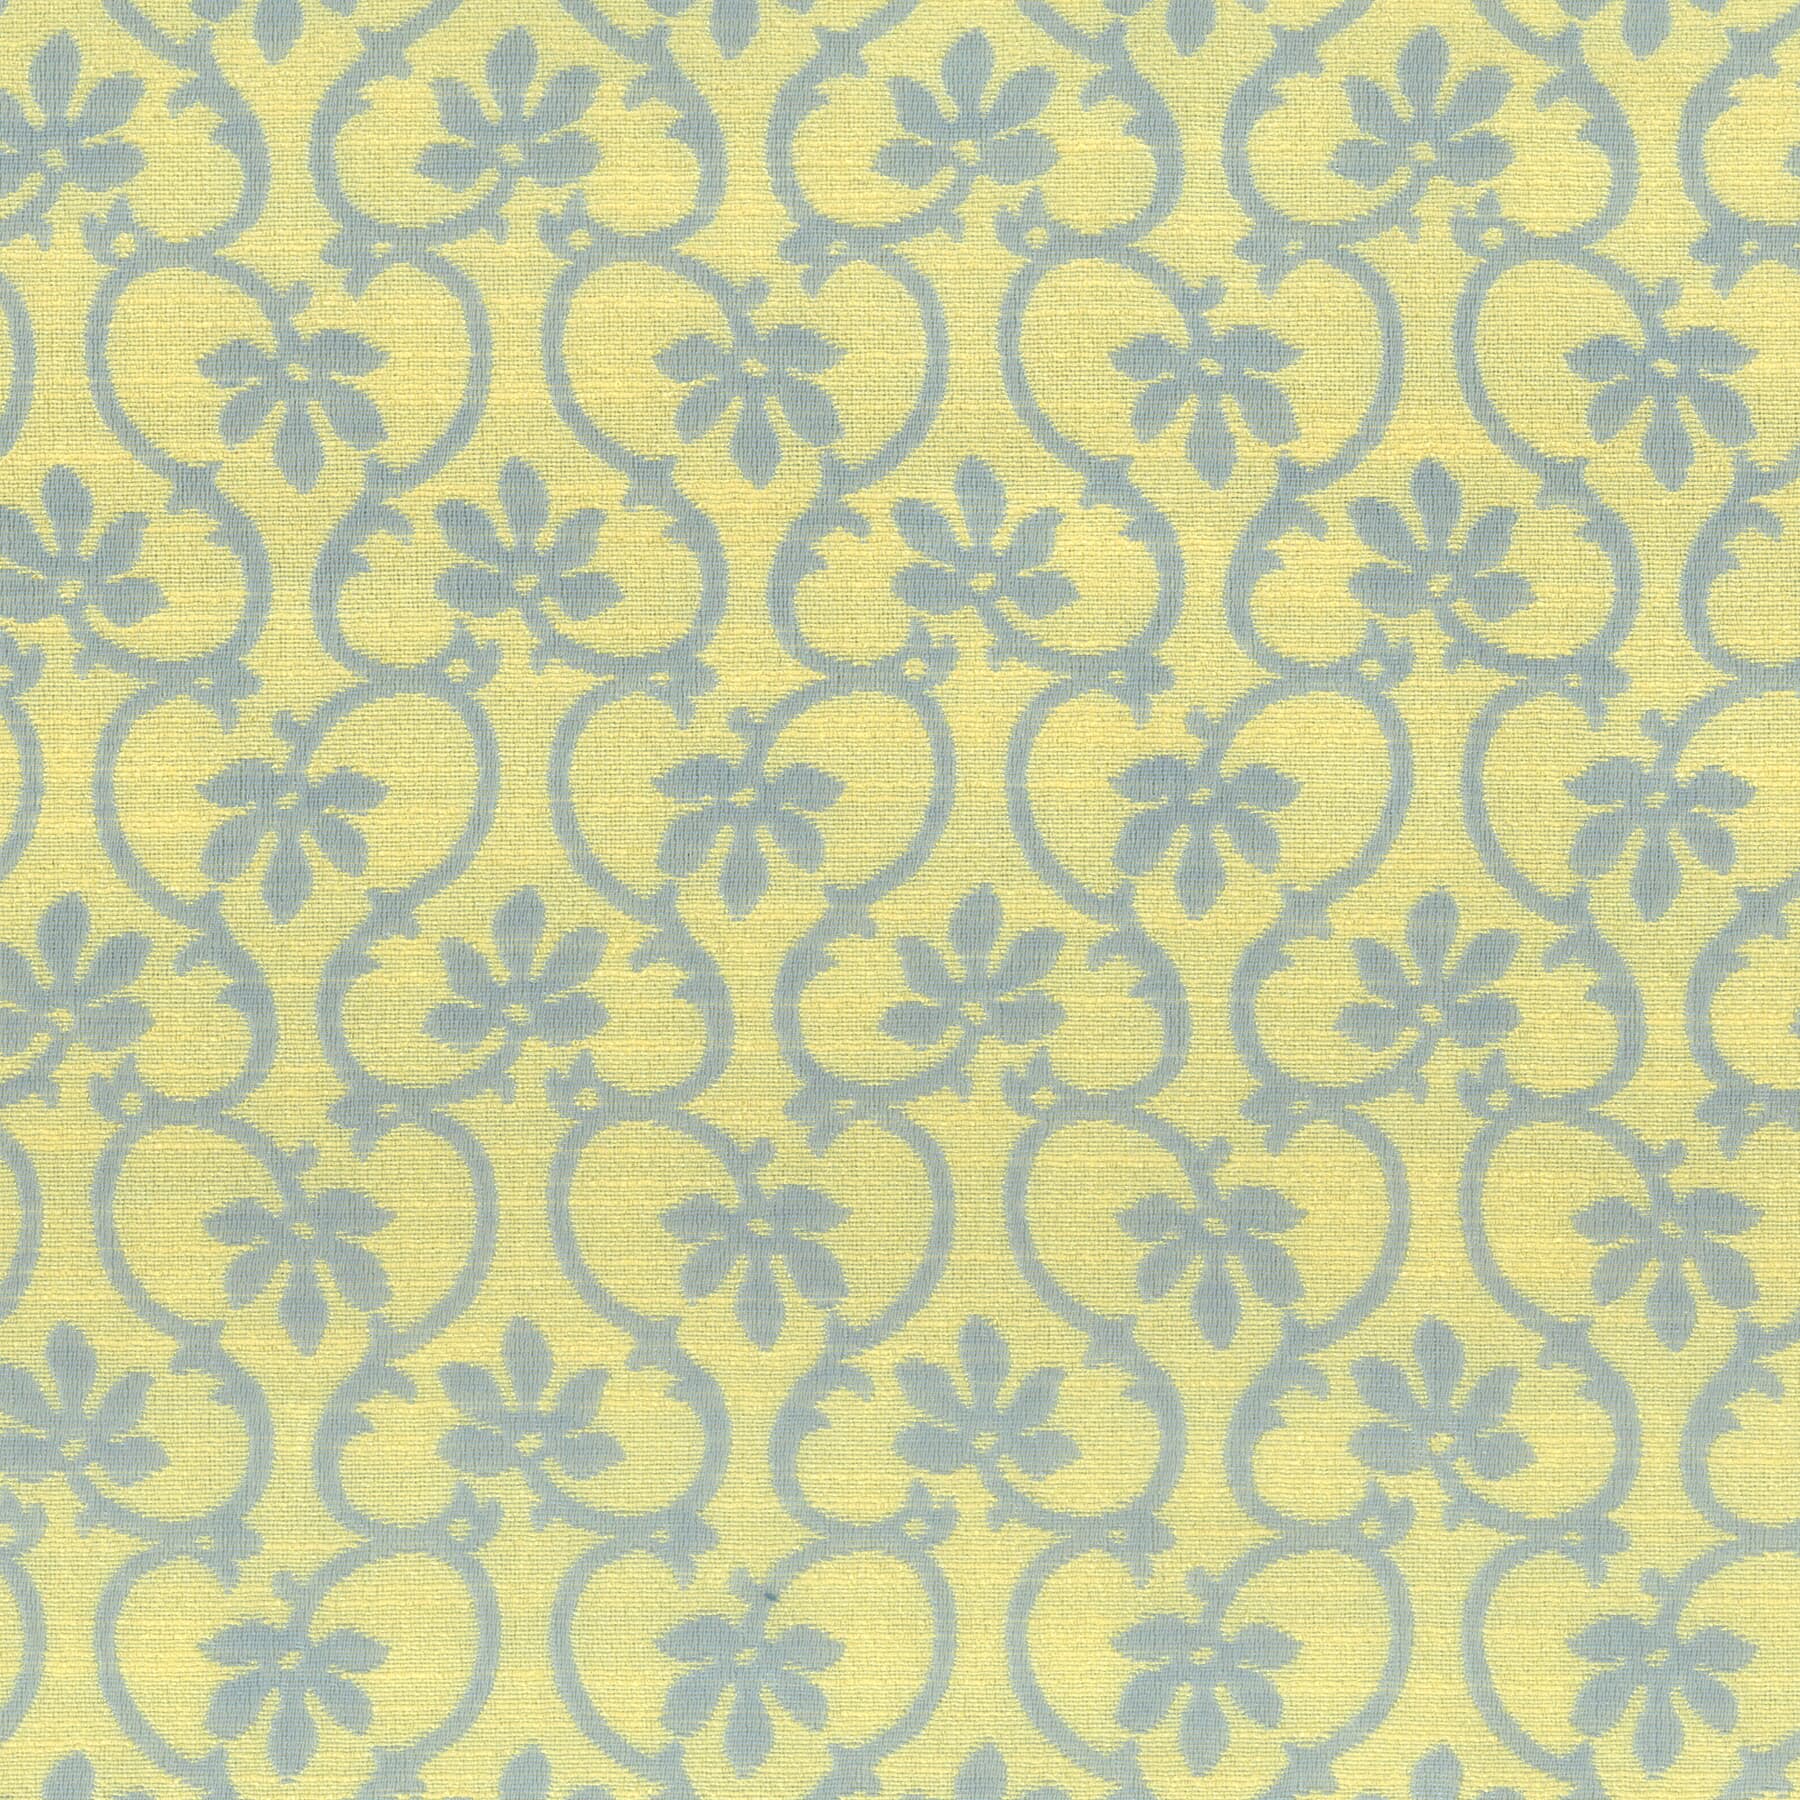 7615-09 Floral Scroll by Stout Fabric